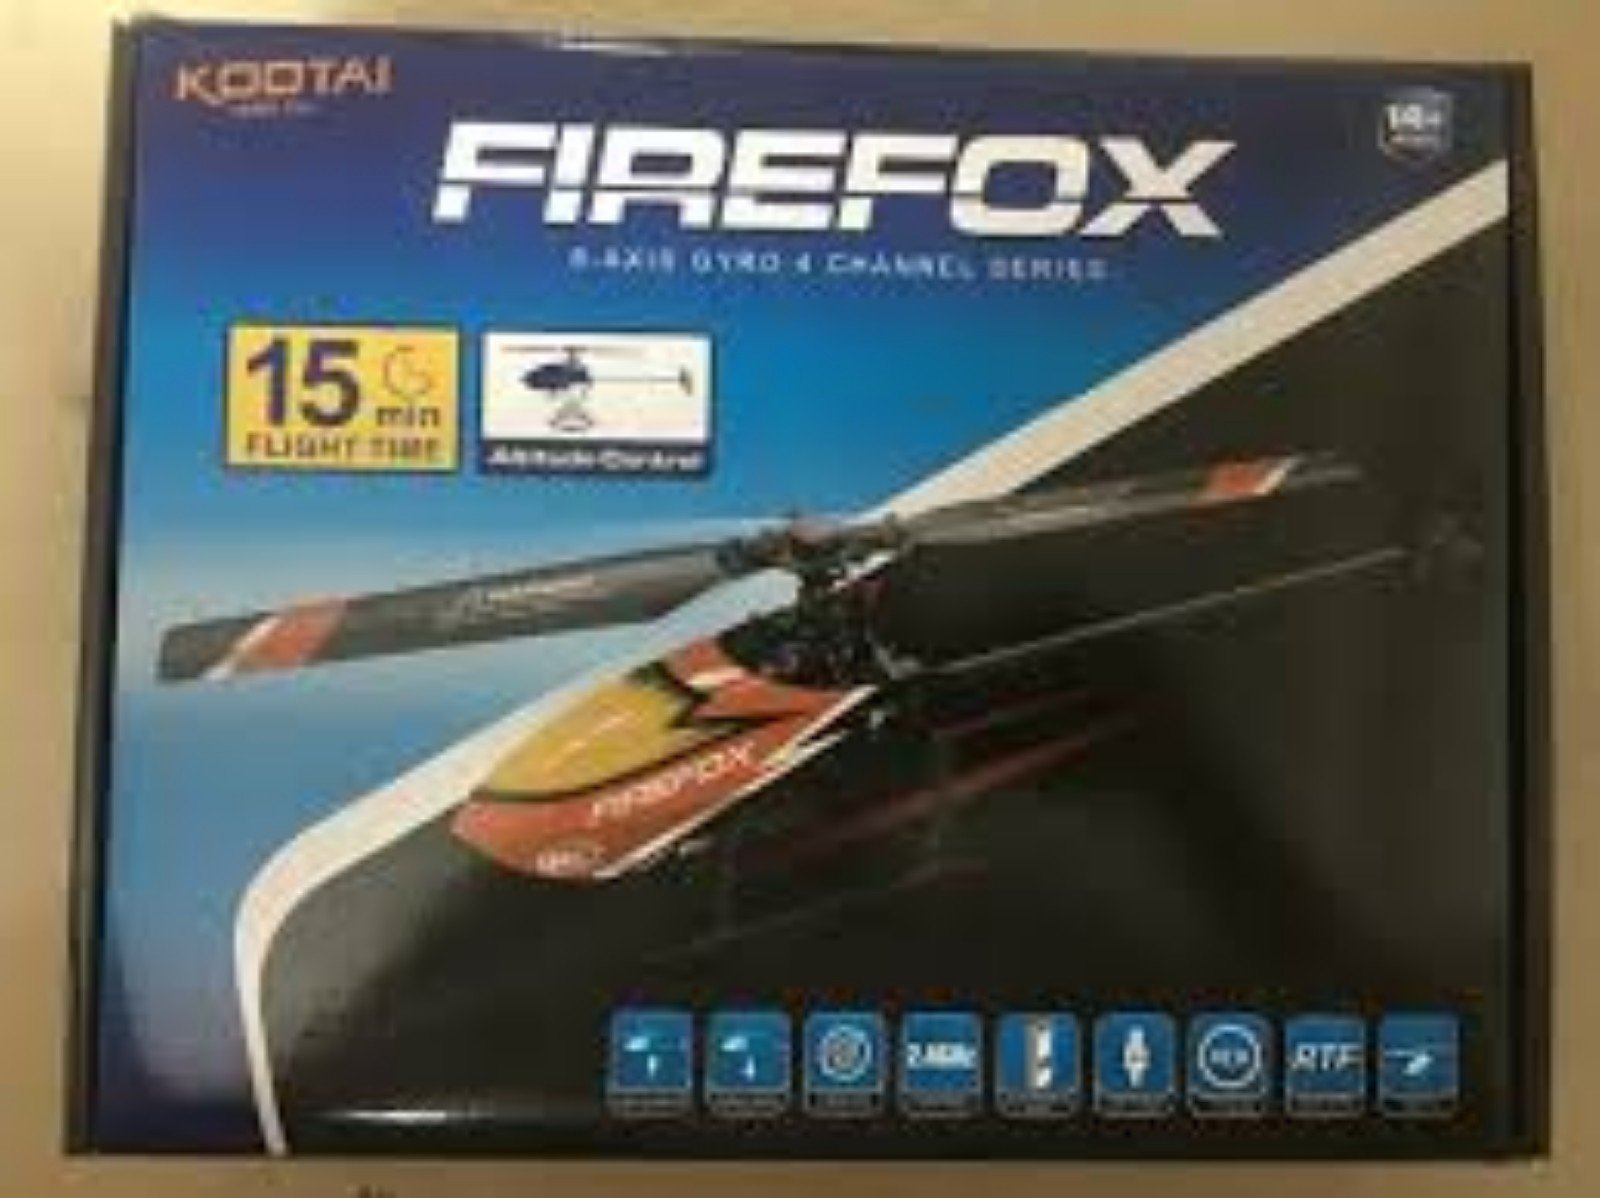 NIB C129 Firefox 120 Size Gyro Stabilized Helicopter - RTF

All batteries includ 5DhnrnRk4